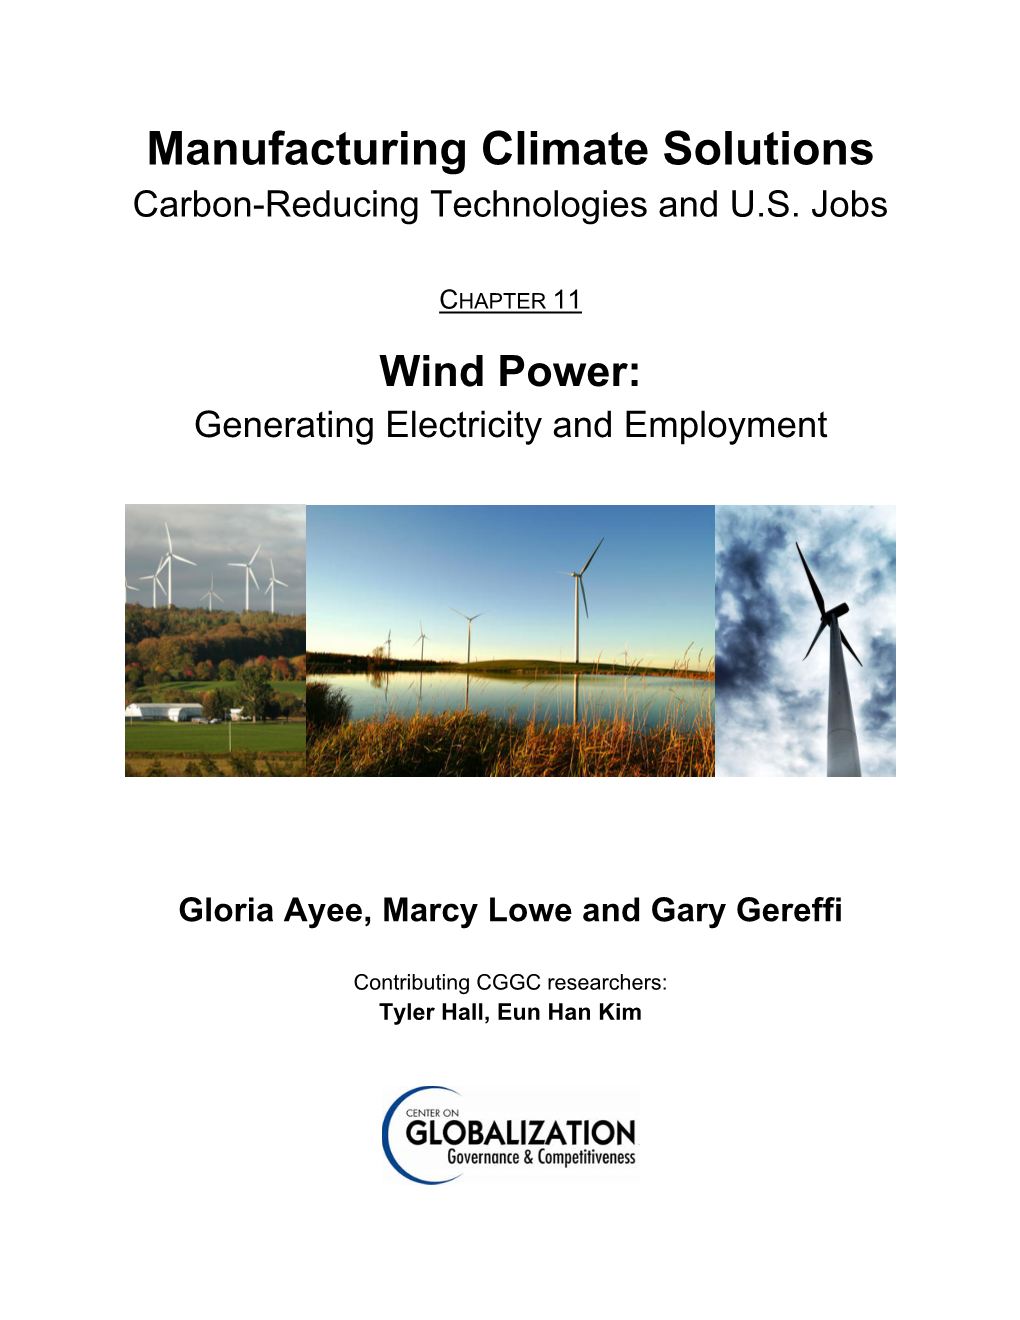 Manufacturing Climate Solutions Carbon-Reducing Technologies and U.S